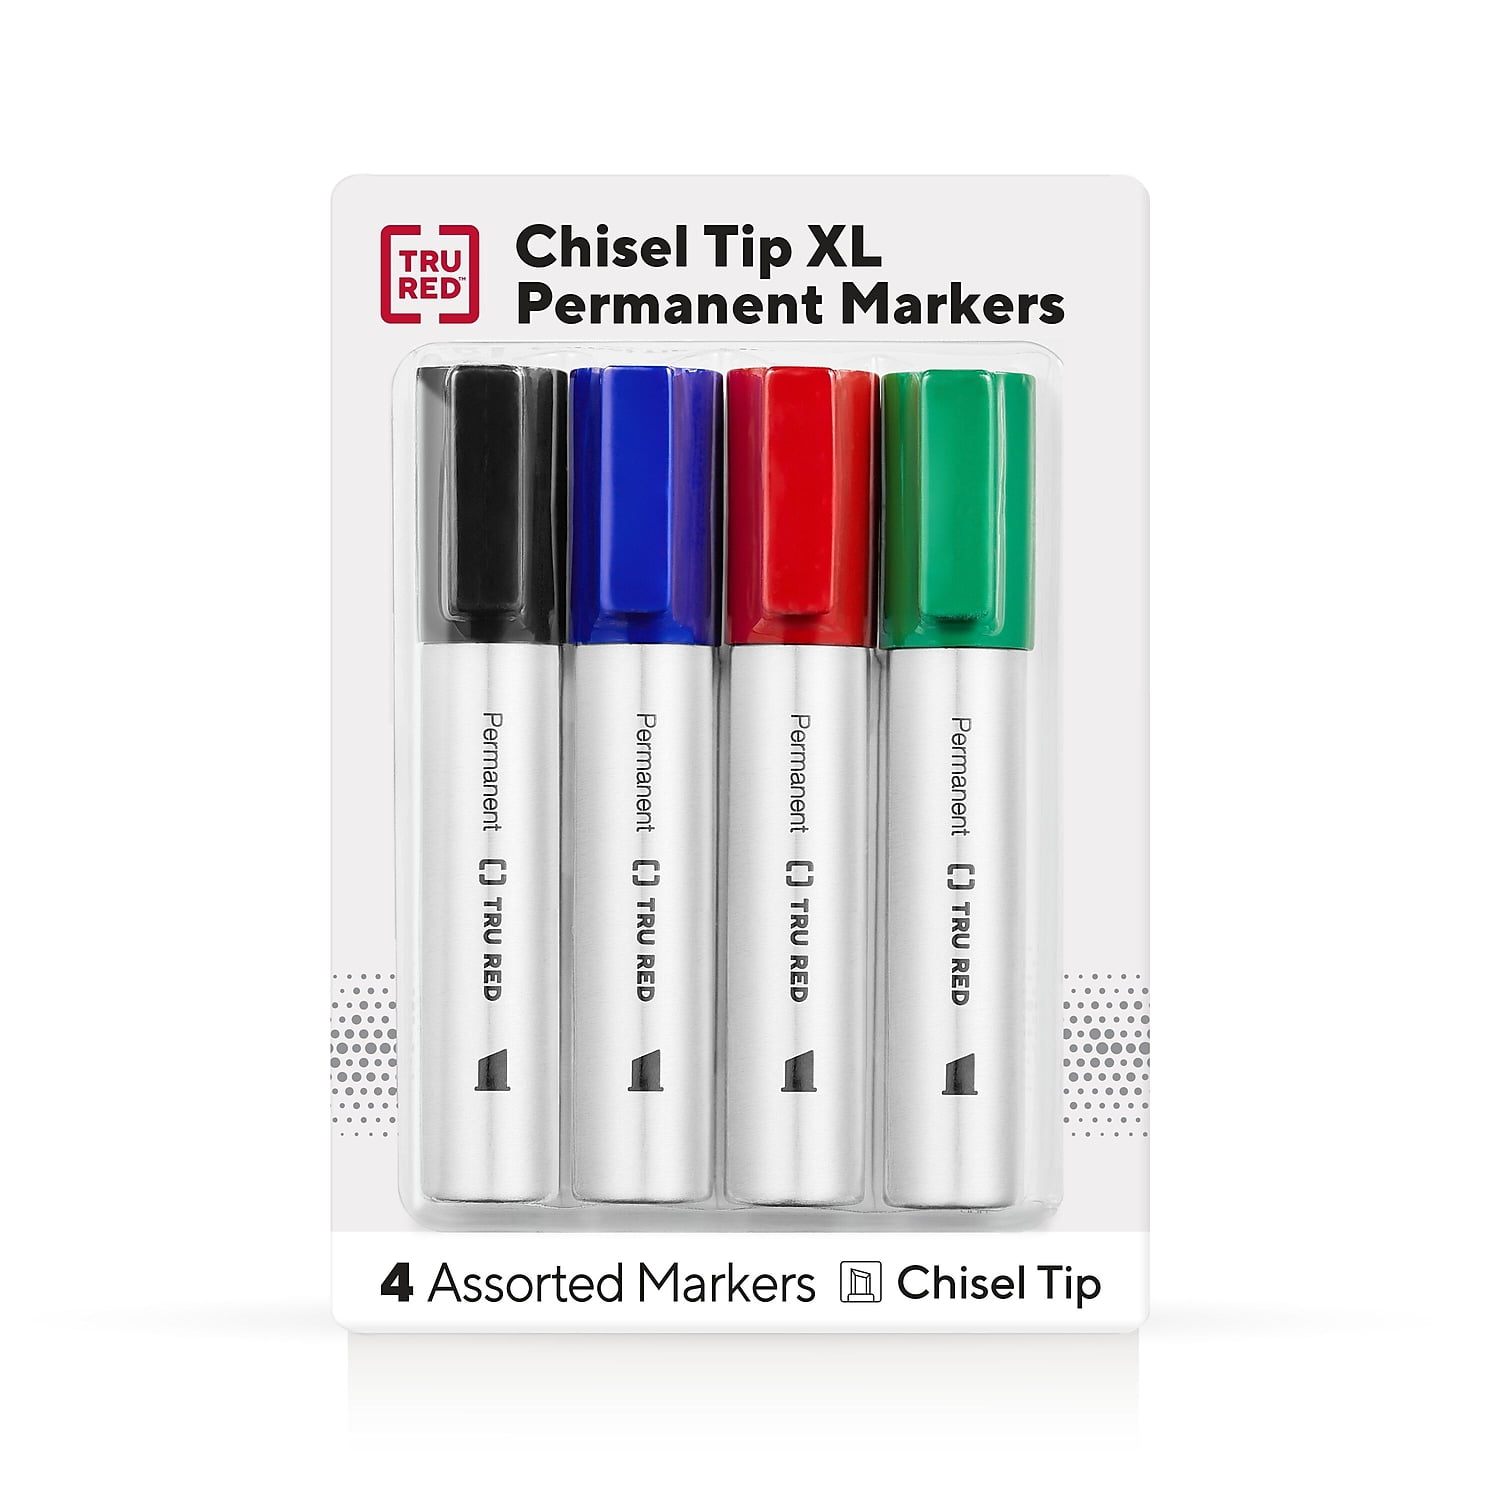  TRU RED TR56880 Tank Dry Erase Markers, Chisel Tip, Assorted :  Office Products